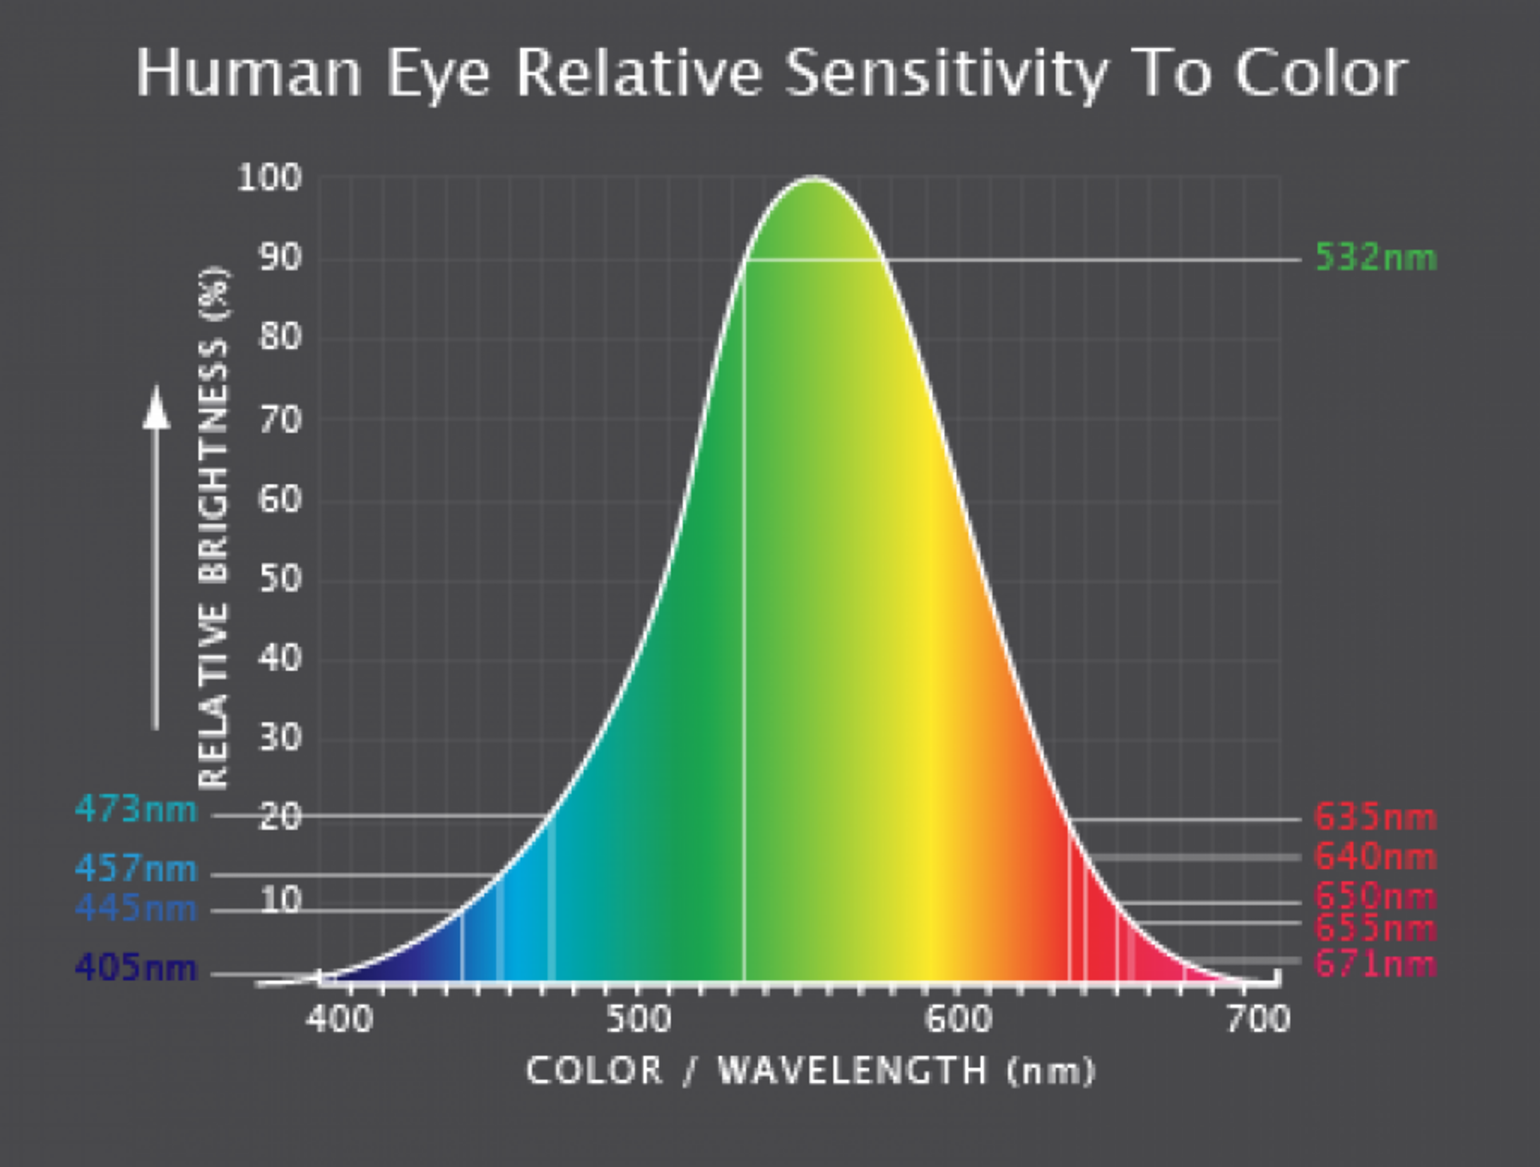 A graph demonstrating the human eye’s relative sensitivity to color and why green laser pointers are more expensive than red laser pointers.